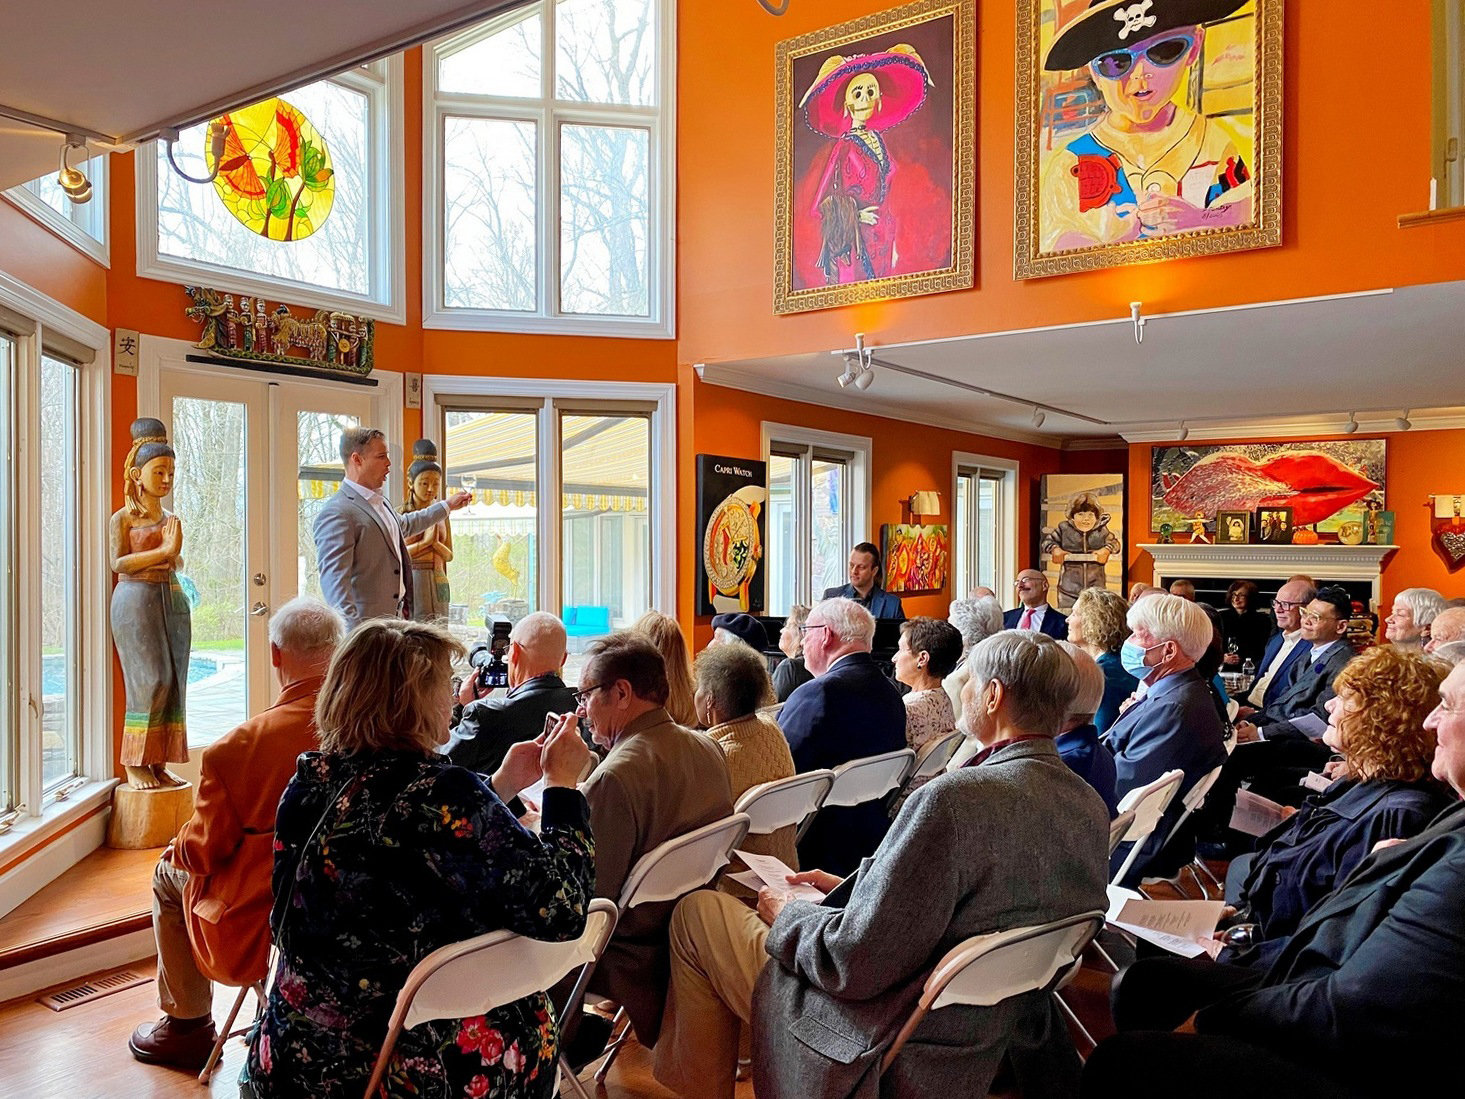 Guests attend the Bucks County Opera Association’s Spring Fling with an Afternoon of Song.